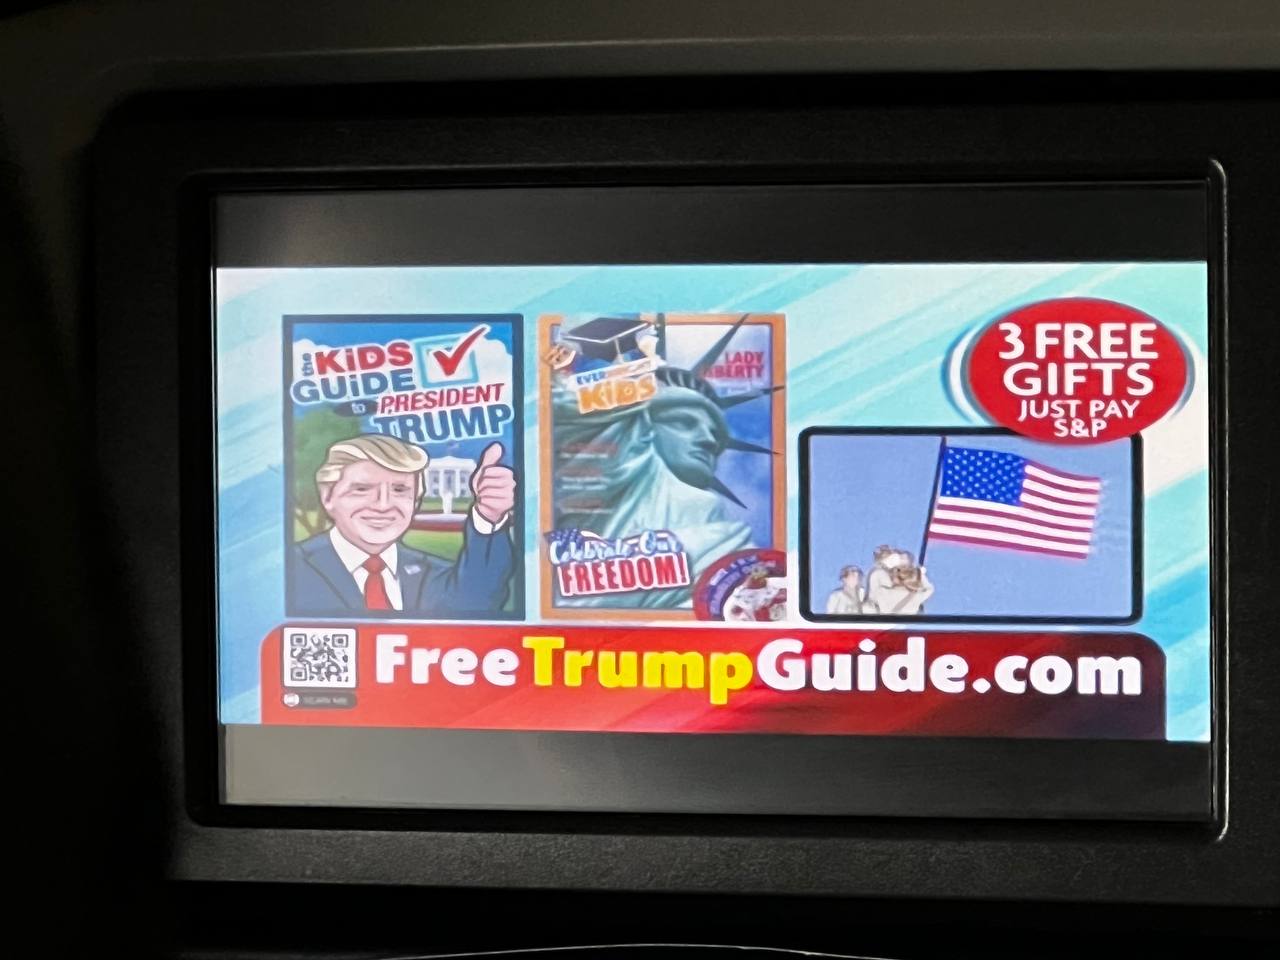 On the flight home there were ads for child friendly guides for Donald Trump.